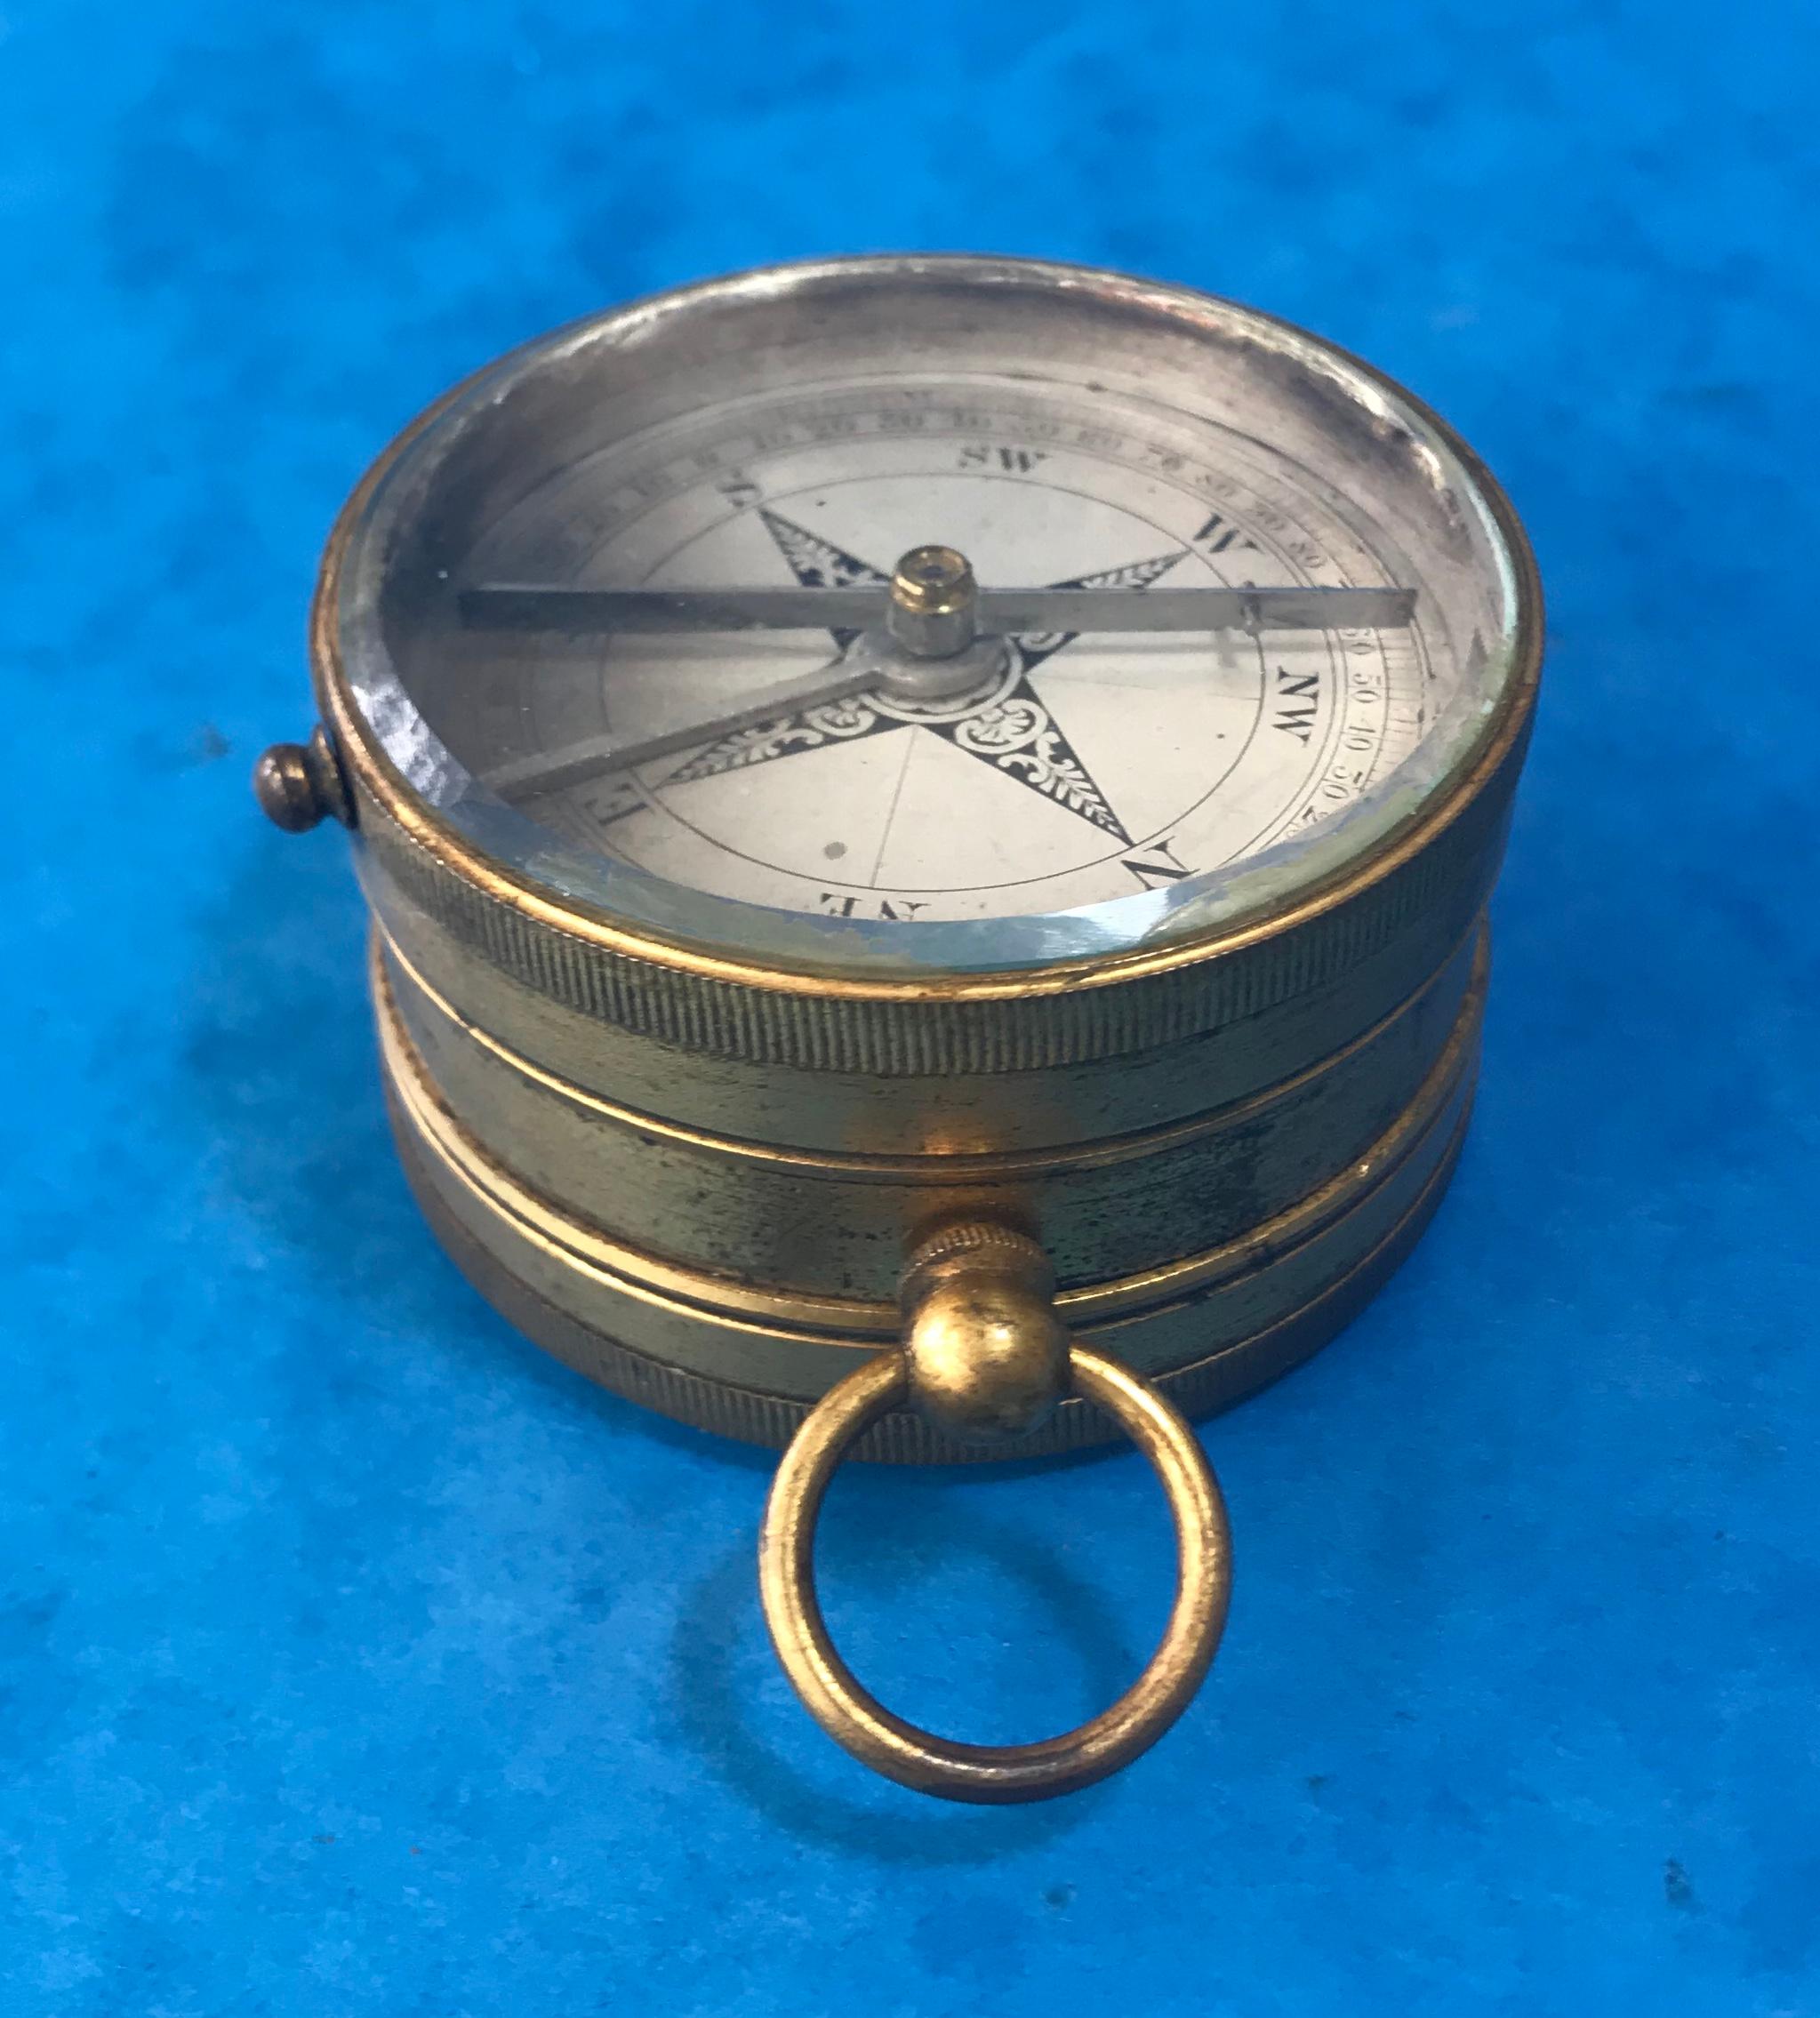 Victorian 1870 pocket compass and barometer, the compass is in working condition it’s “Carpenter and Westley” and it measures 5 by 5 and stands 3 cm high.